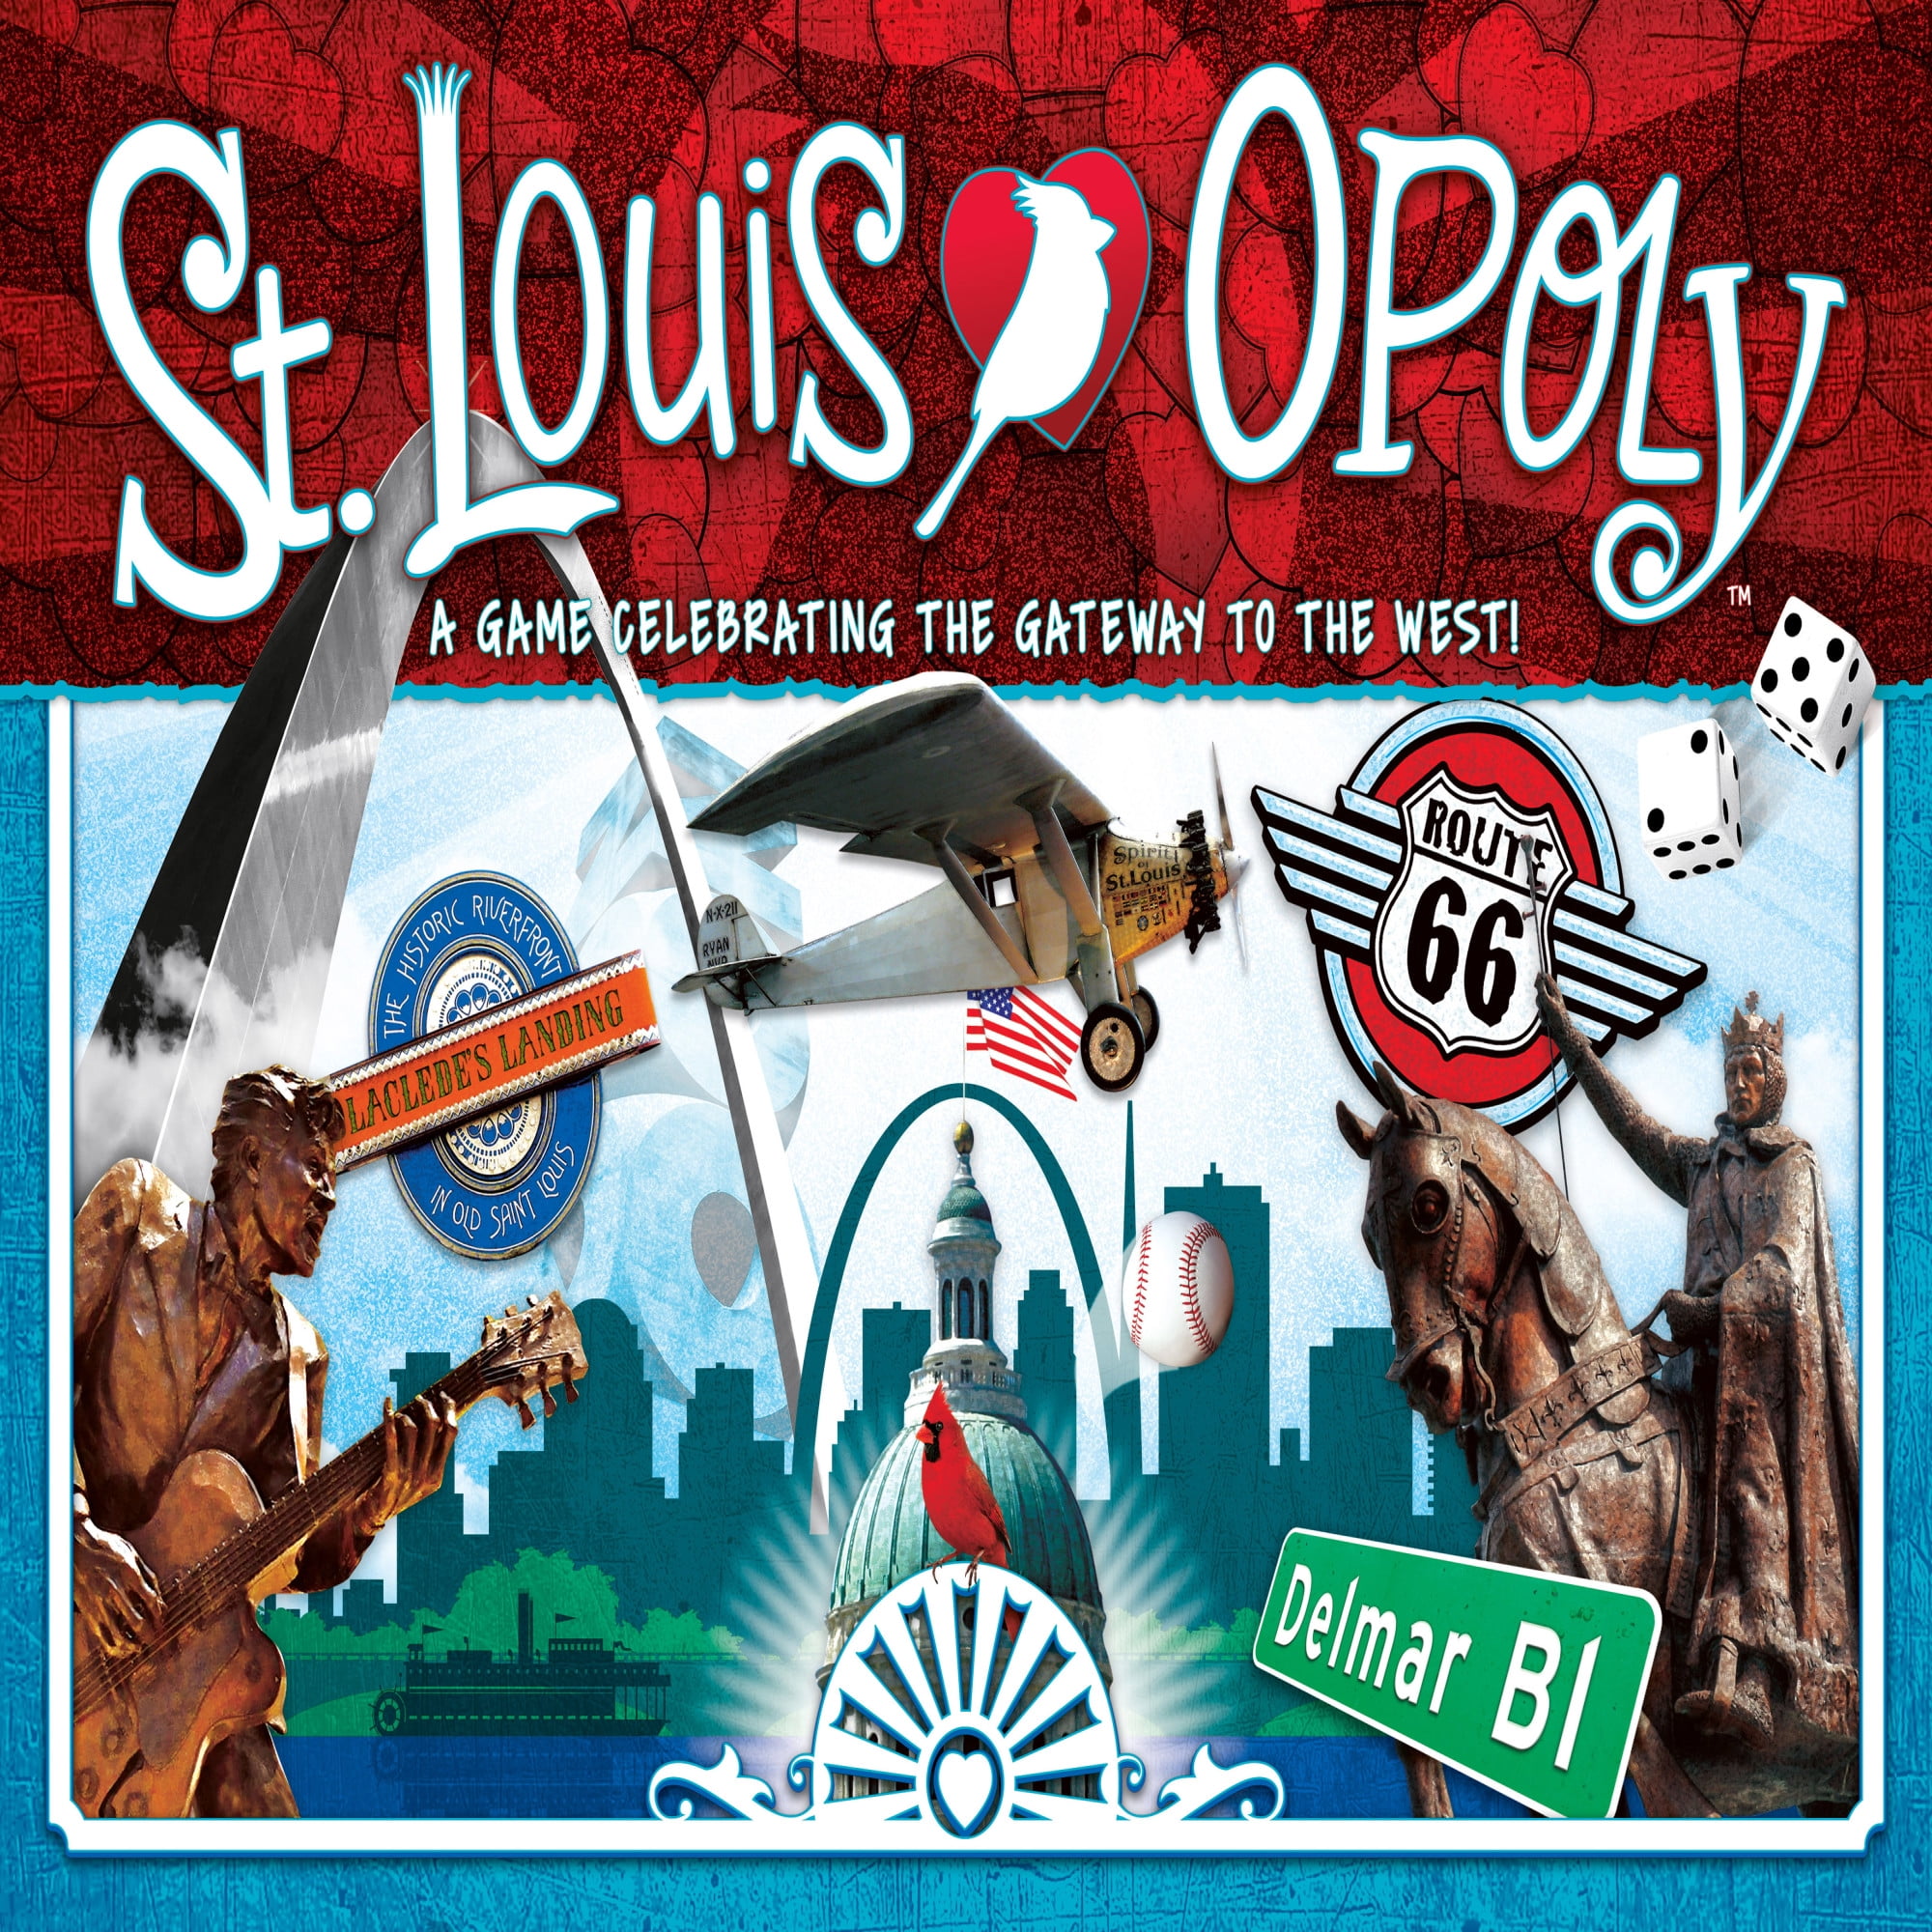 St. Louis Opoly Board Game, by Late for the Sky 